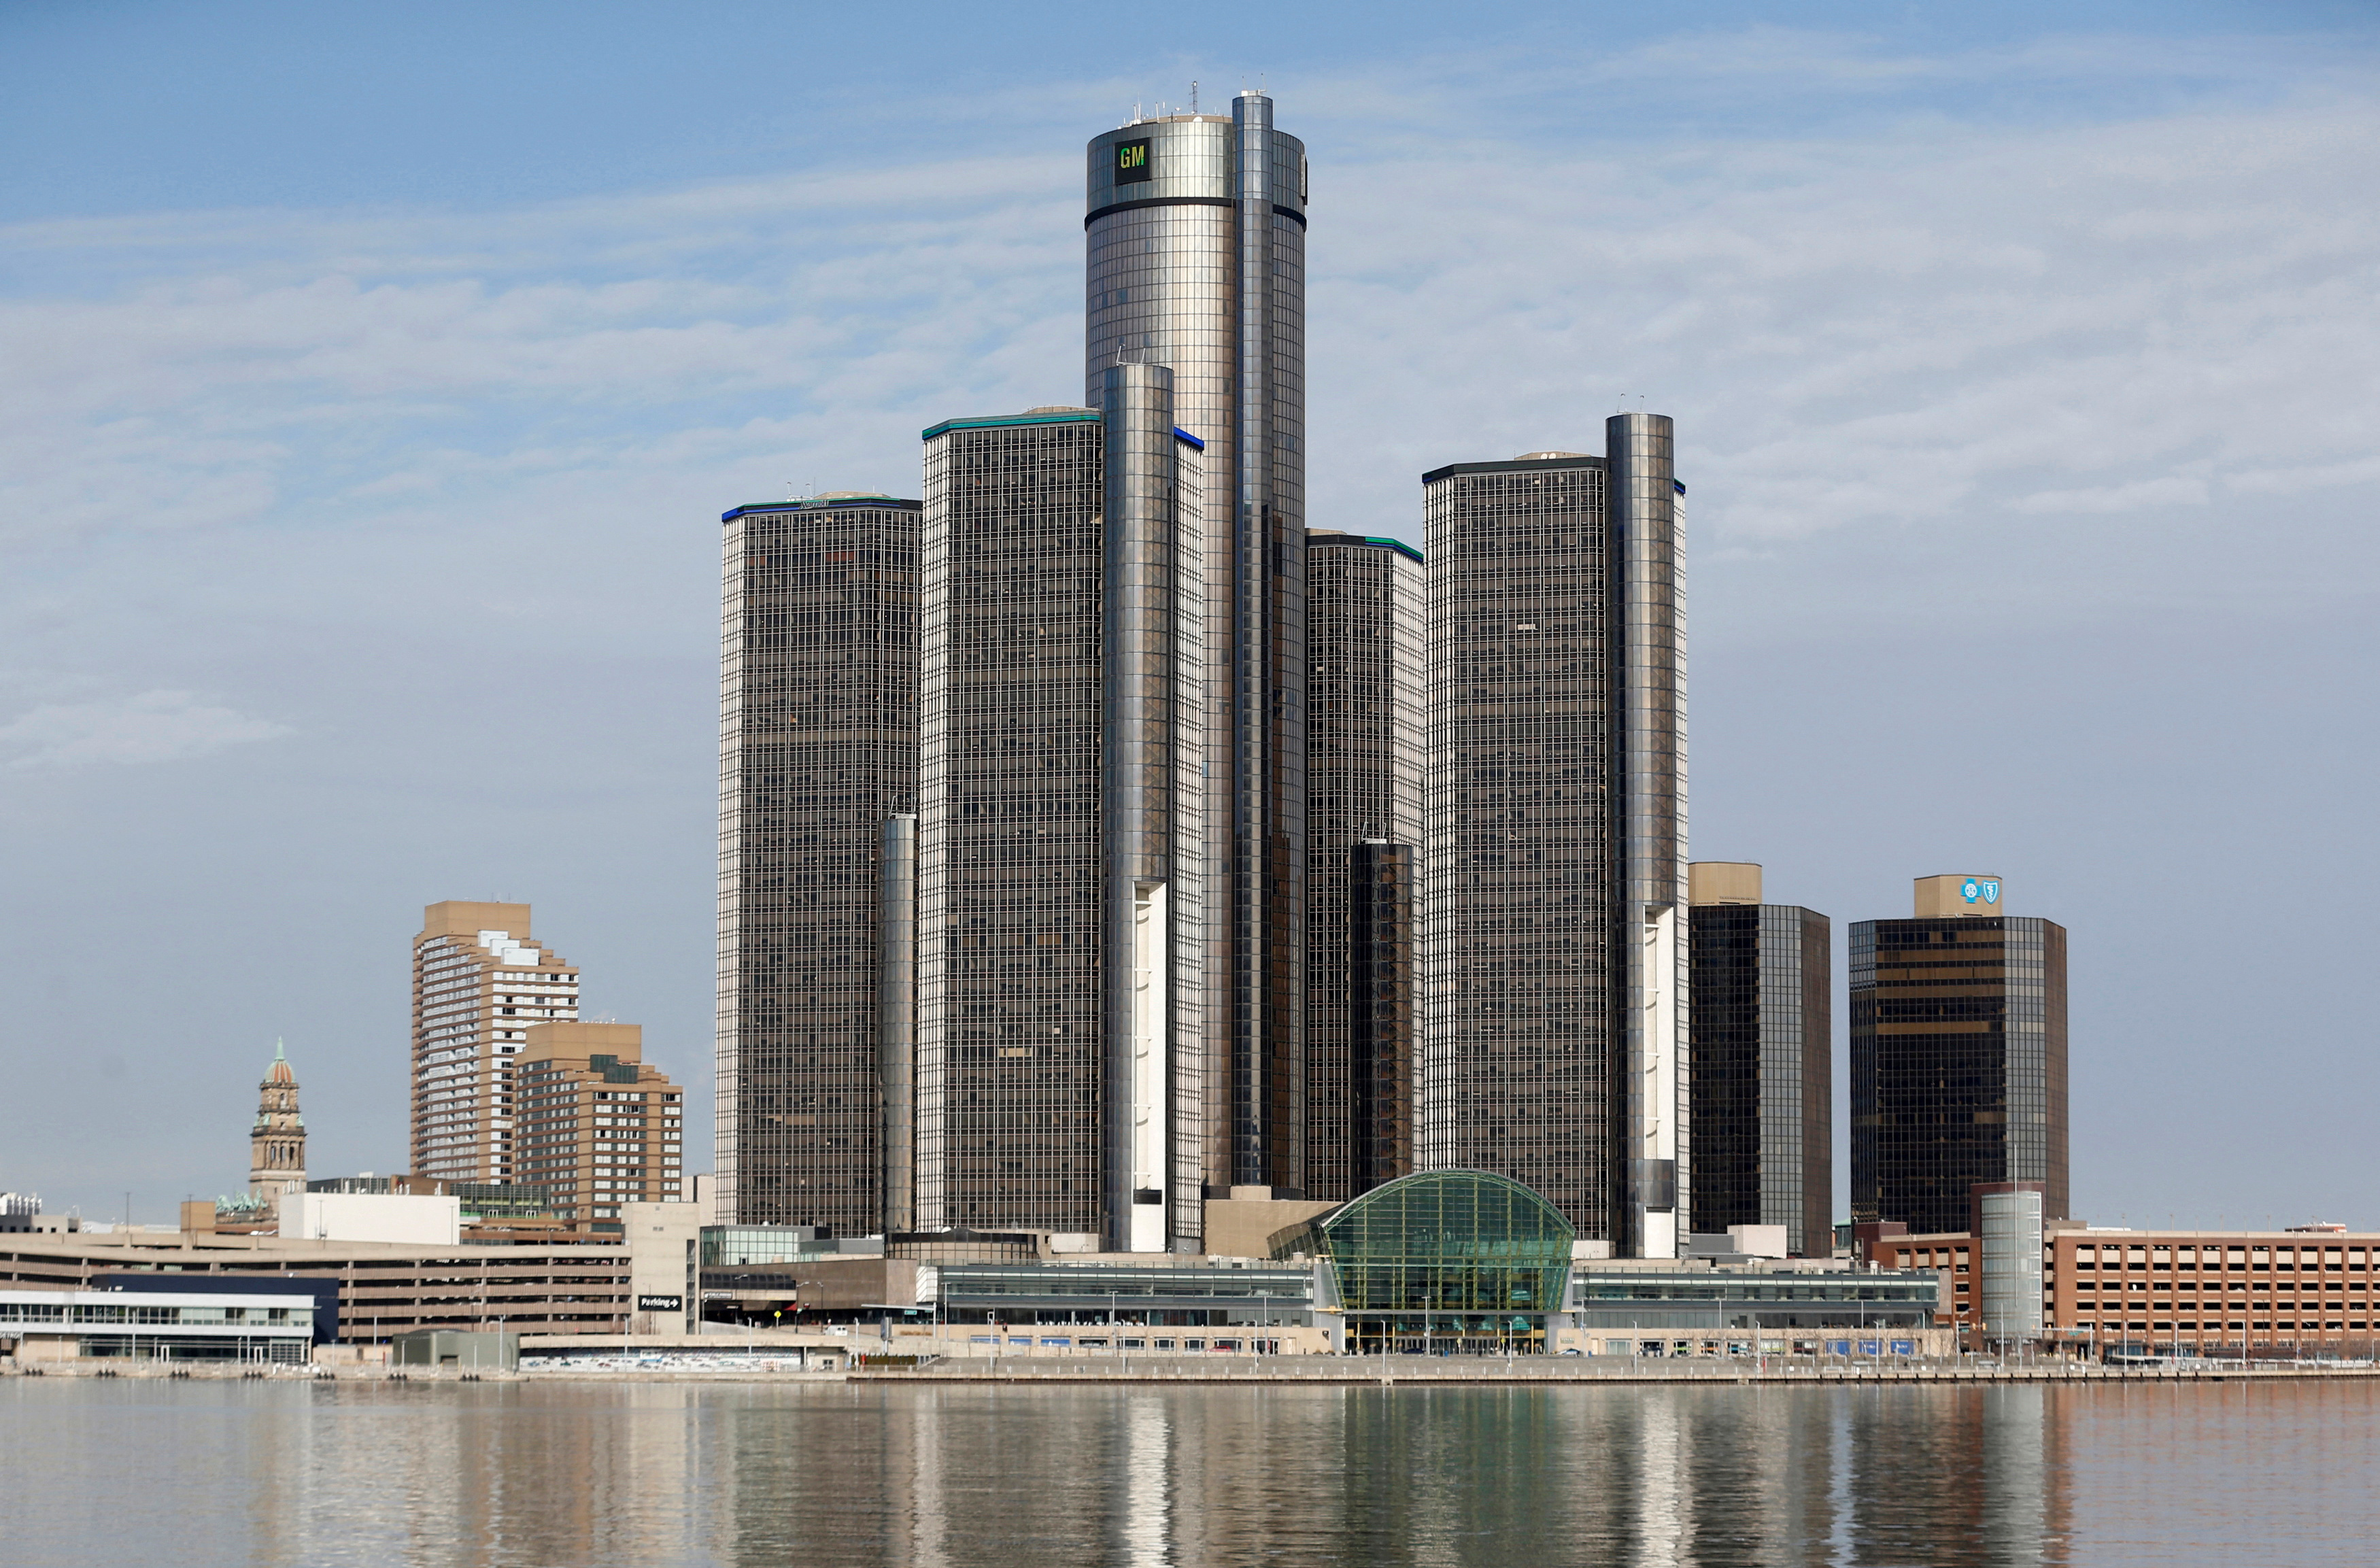 The General Motors Co. headquarters is seen in Detroit from Windsor, Ontario